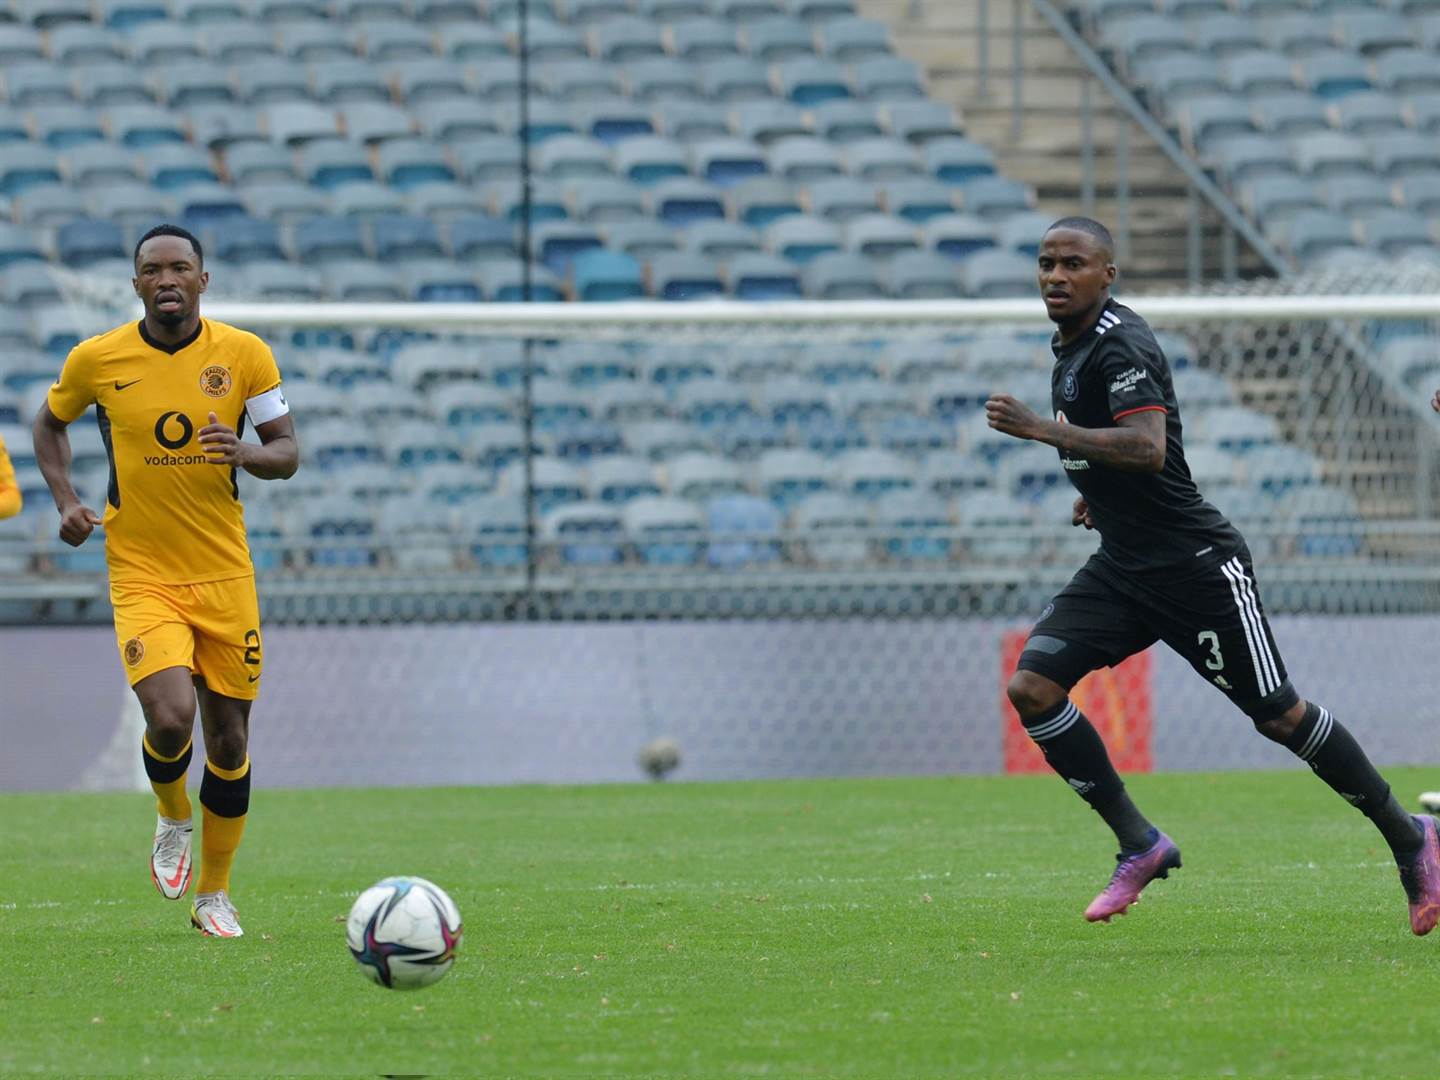 Orlando Pirates fight back to share spoils with Kaizer Chiefs in derby